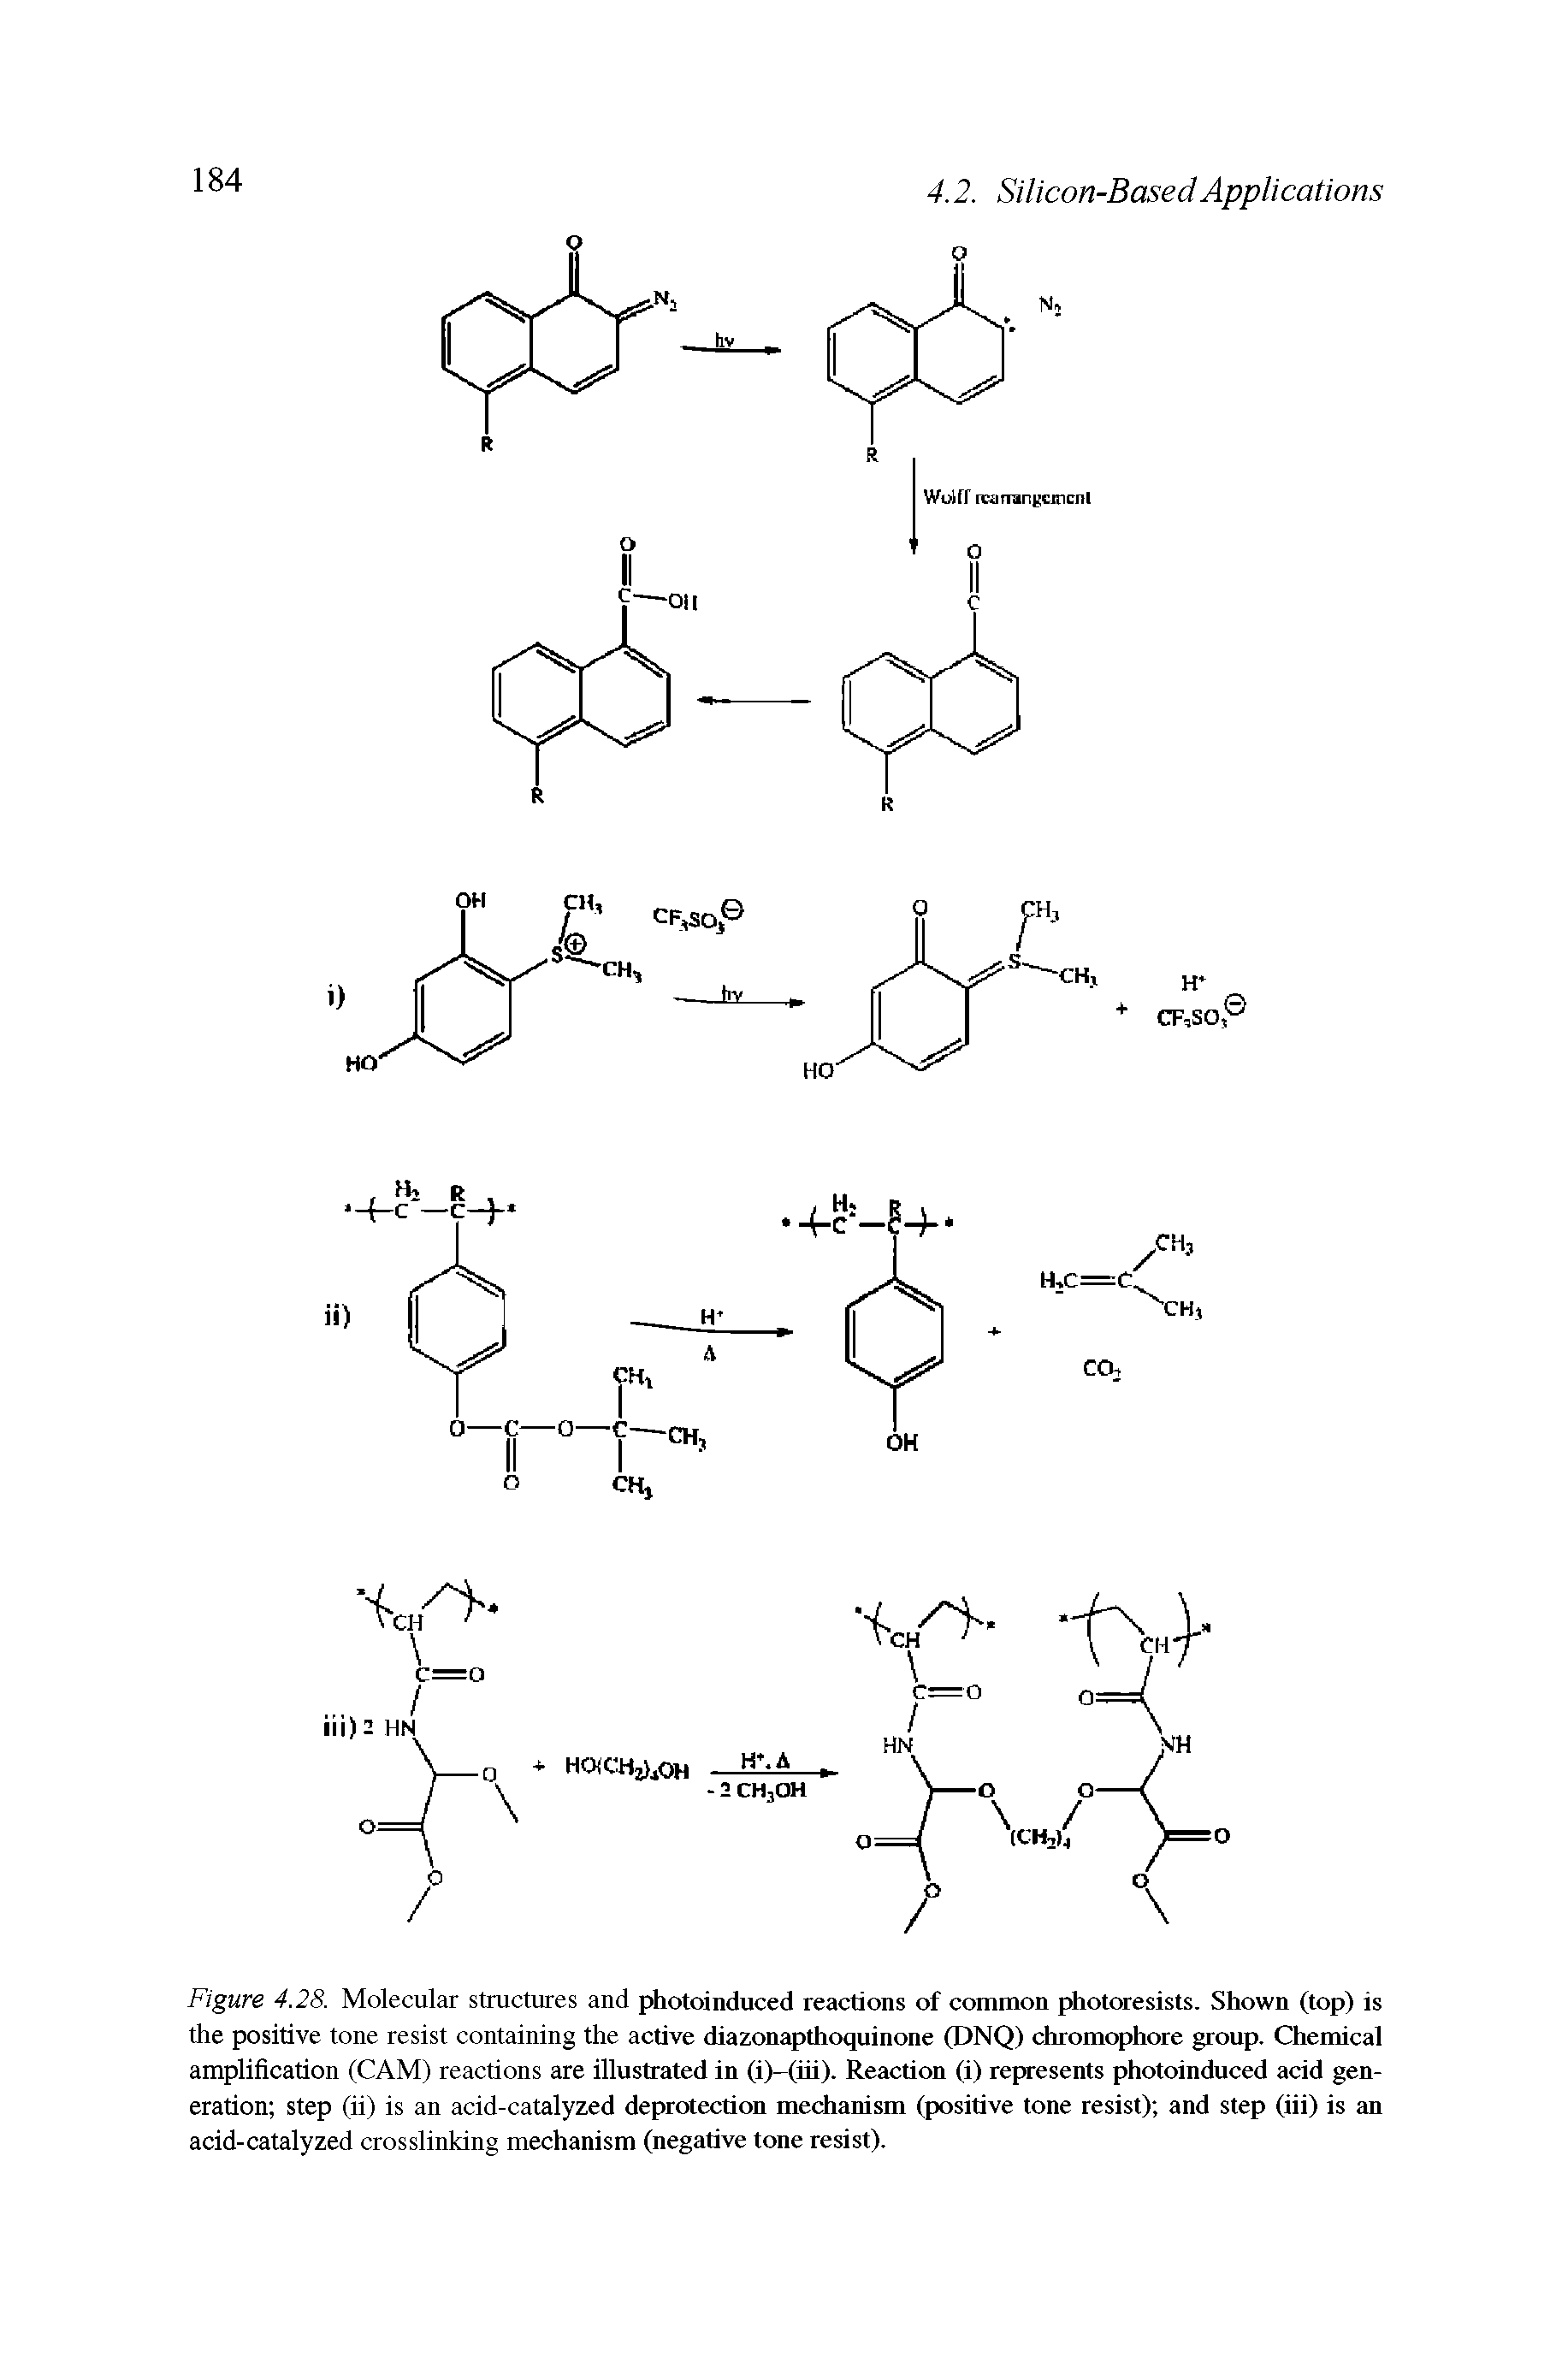 Figure 4.28. Molecular structures and photoinduced reactions of common photoresists. Shown (top) is the positive tone resist containing the active diazonapthoquinone (DNQ) chromophore group. Chemical amplification (CAM) reactions are illustrated in (i)-(iii). Reaction (i) represents photoinduced acid generation step (ii) is an acid-catalyzed deprotection mechanism (positive tone resist) and step (iii) is an acid-catalyzed crosslinking mechanism (negative tone resist).